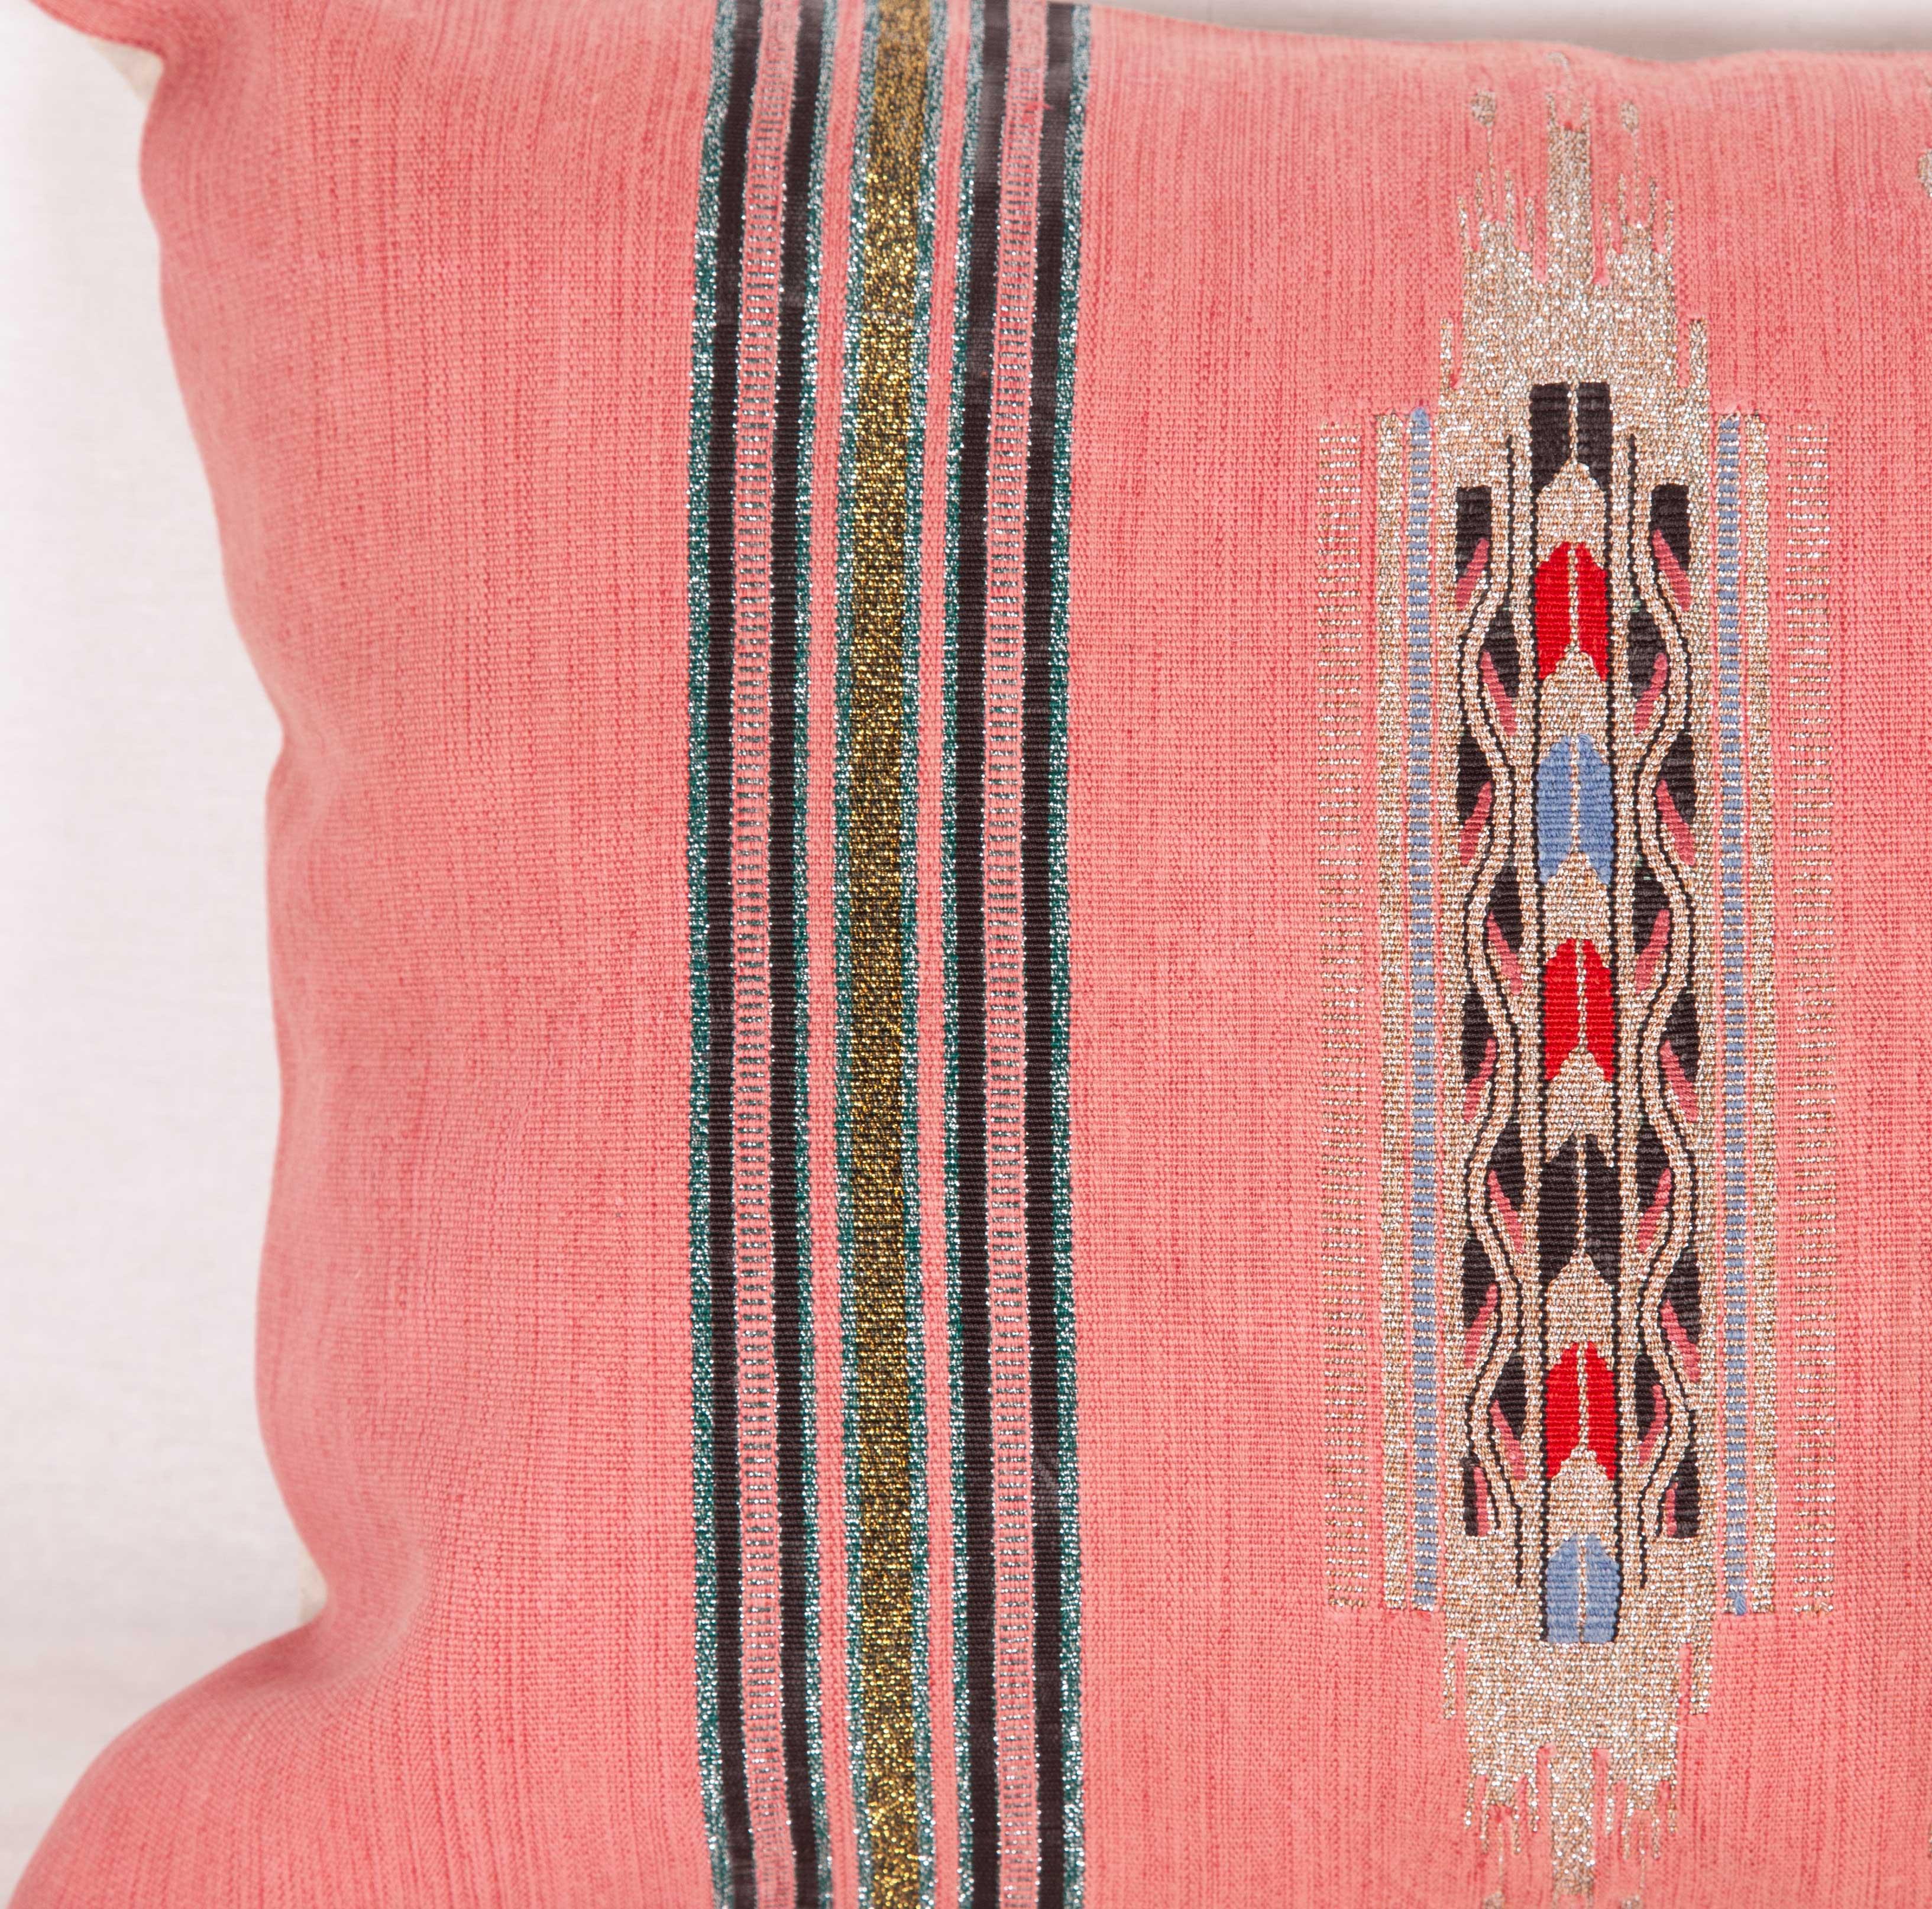 Lebanese Antique Pillow Case Fashioned from an Early 20th Century Tapestry from Lebonon